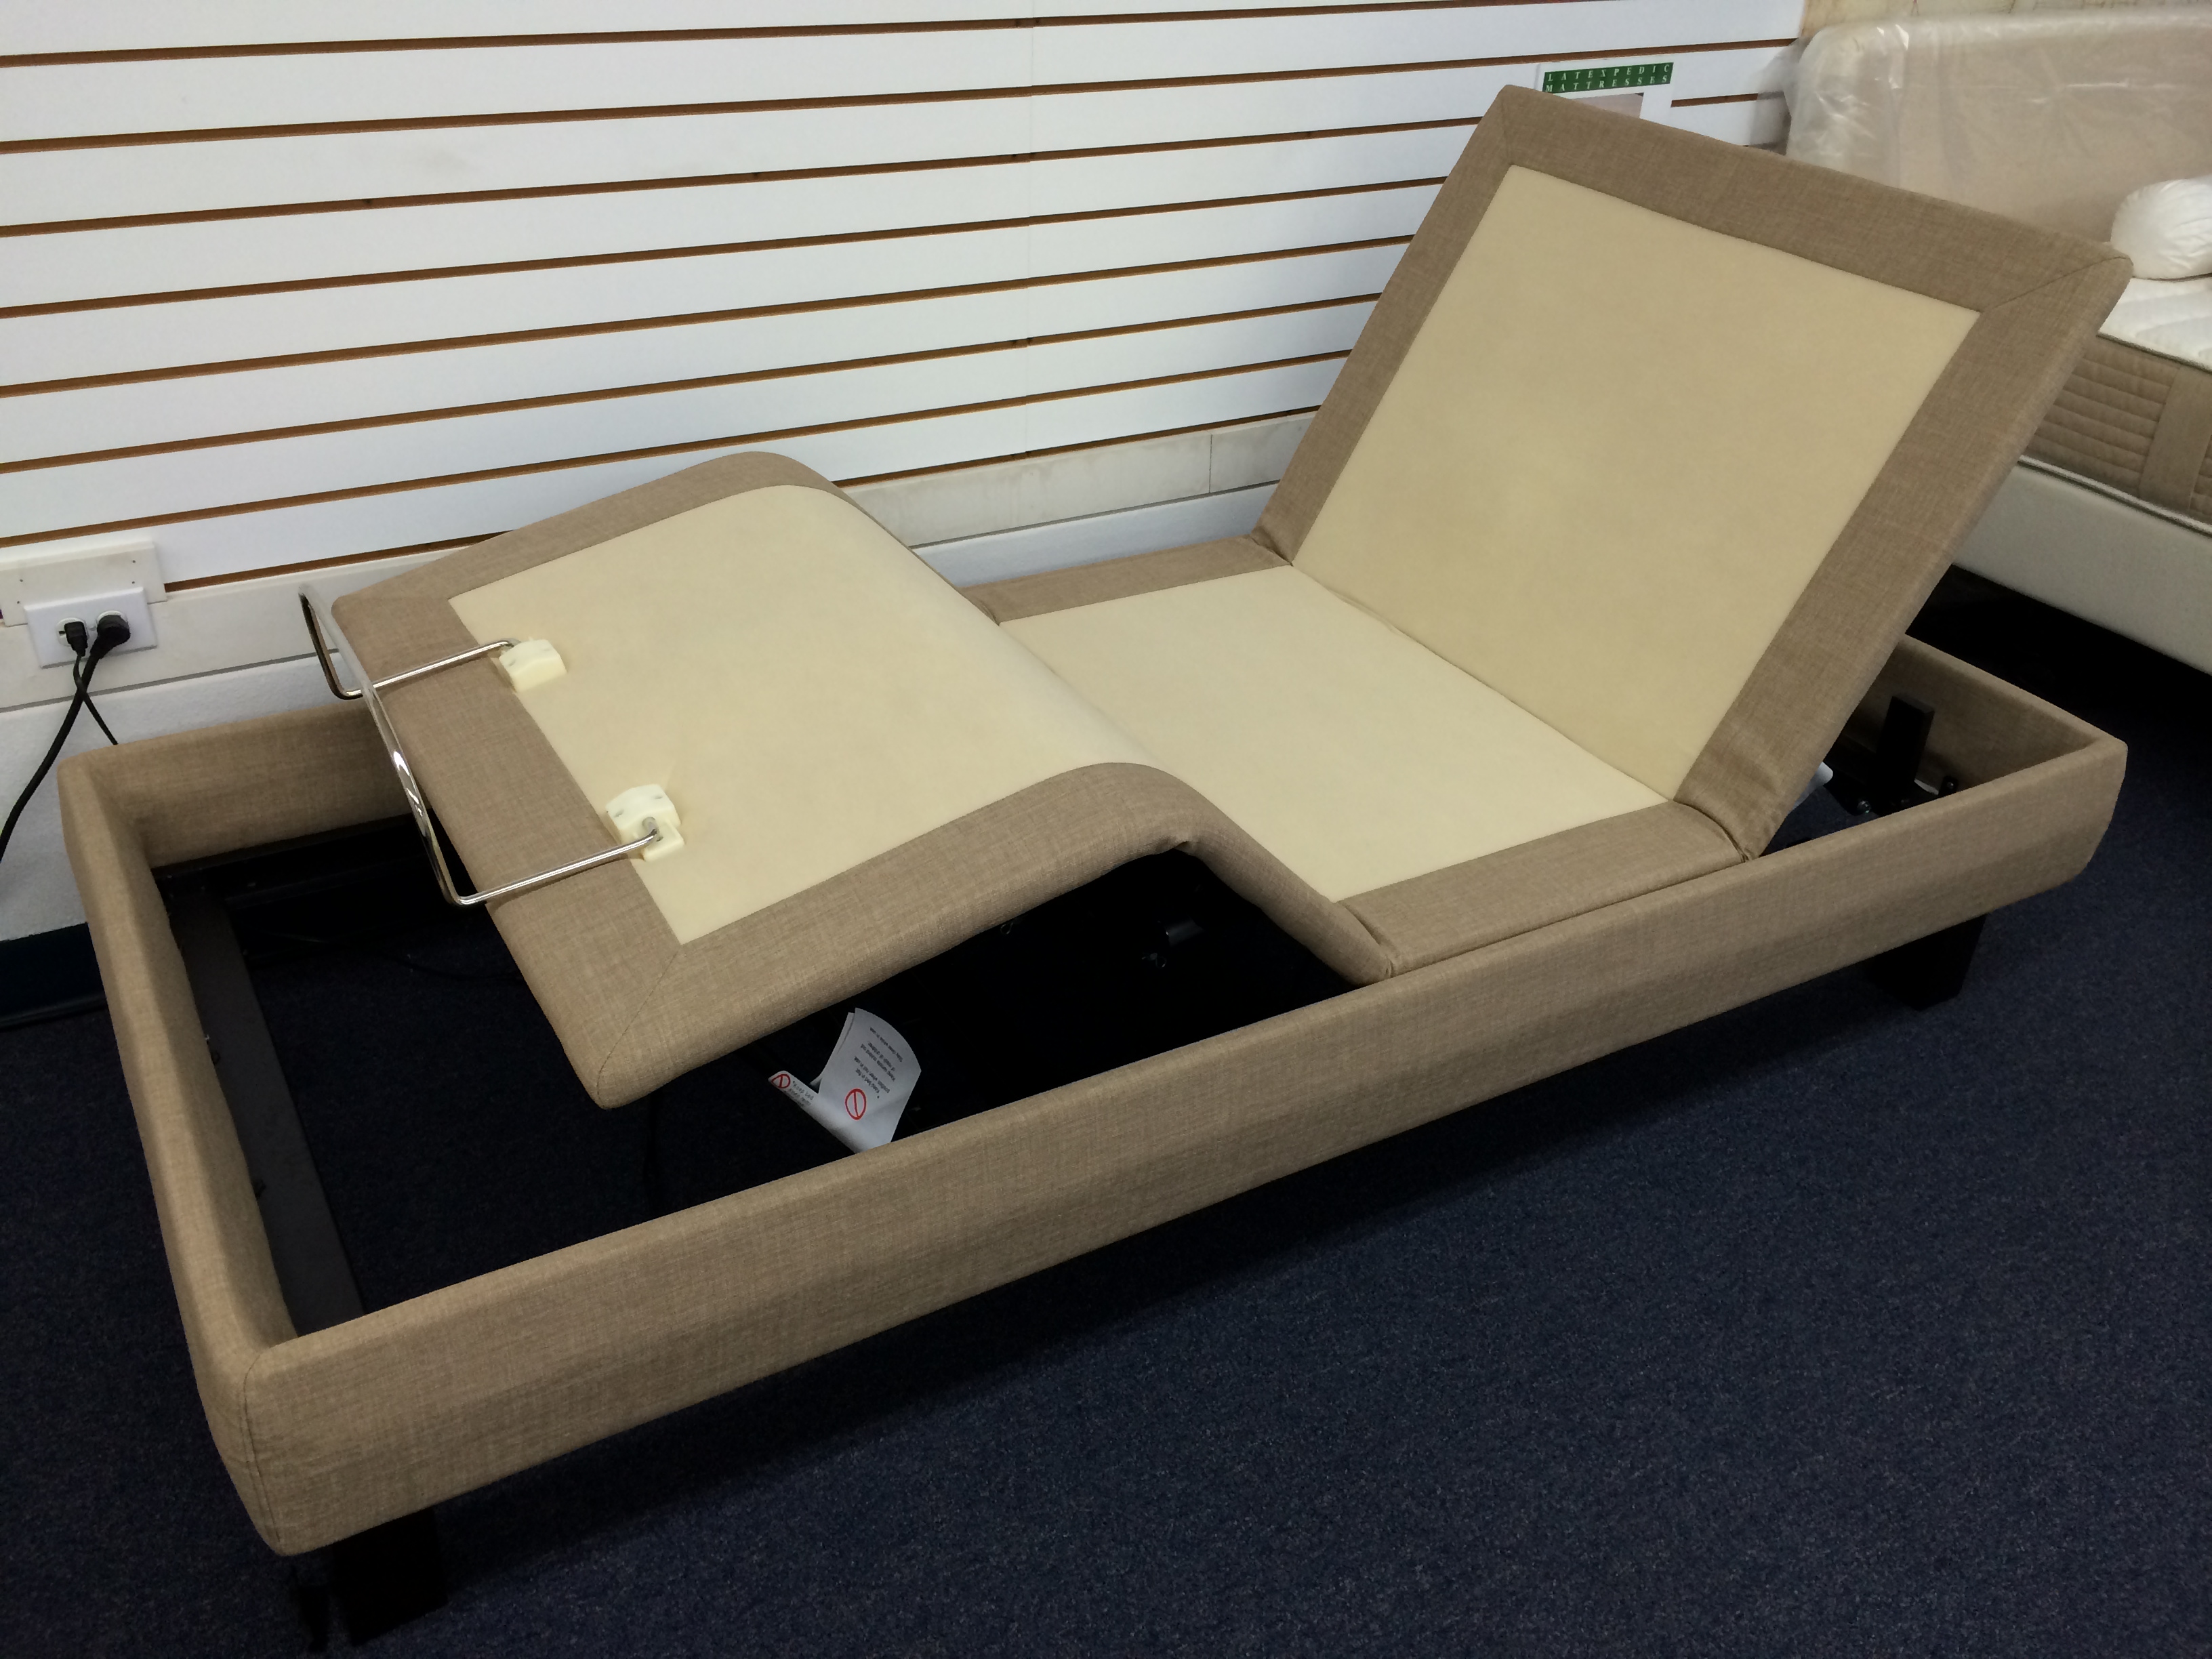 bariatric bed